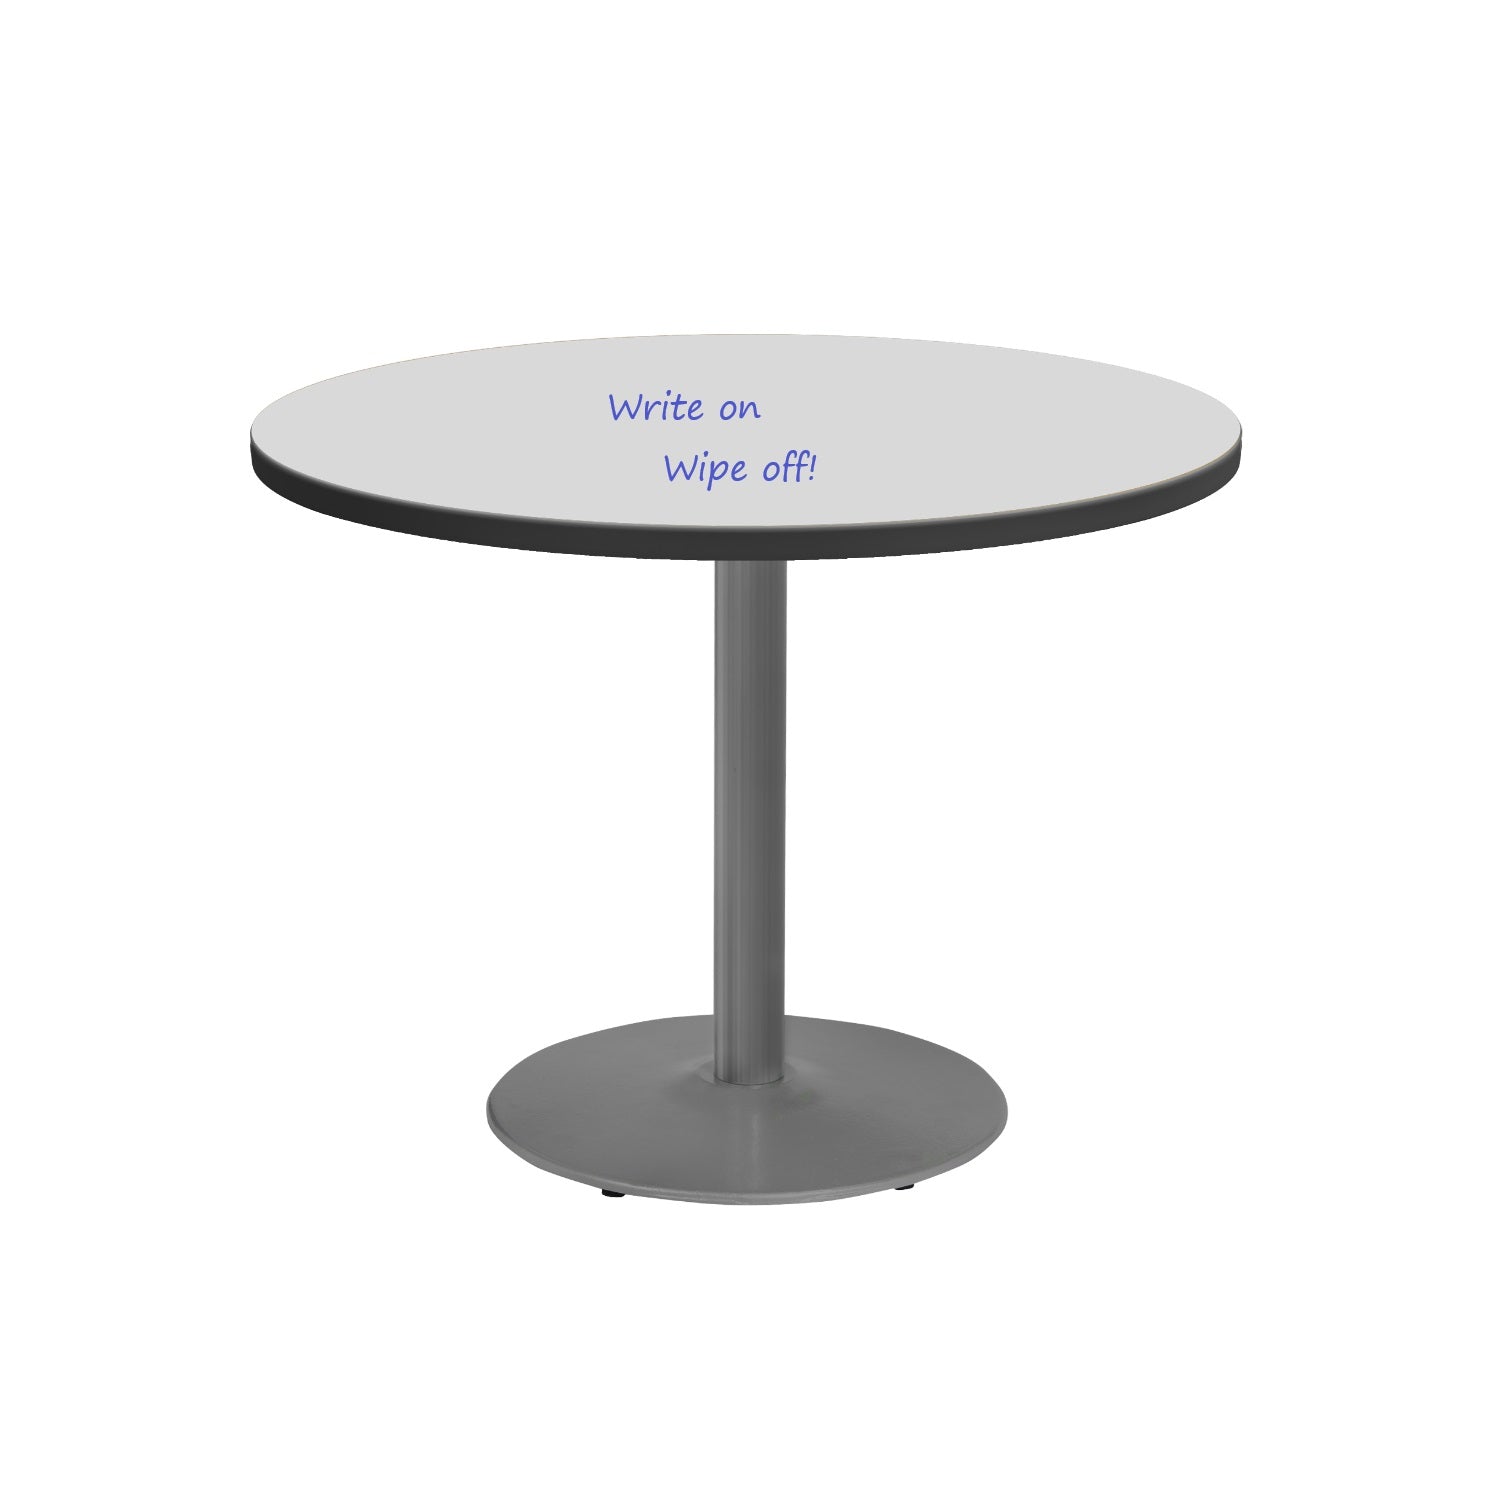 36" Round Sitting Height Café Table with Dry-Erase Laminate Markerboard Top